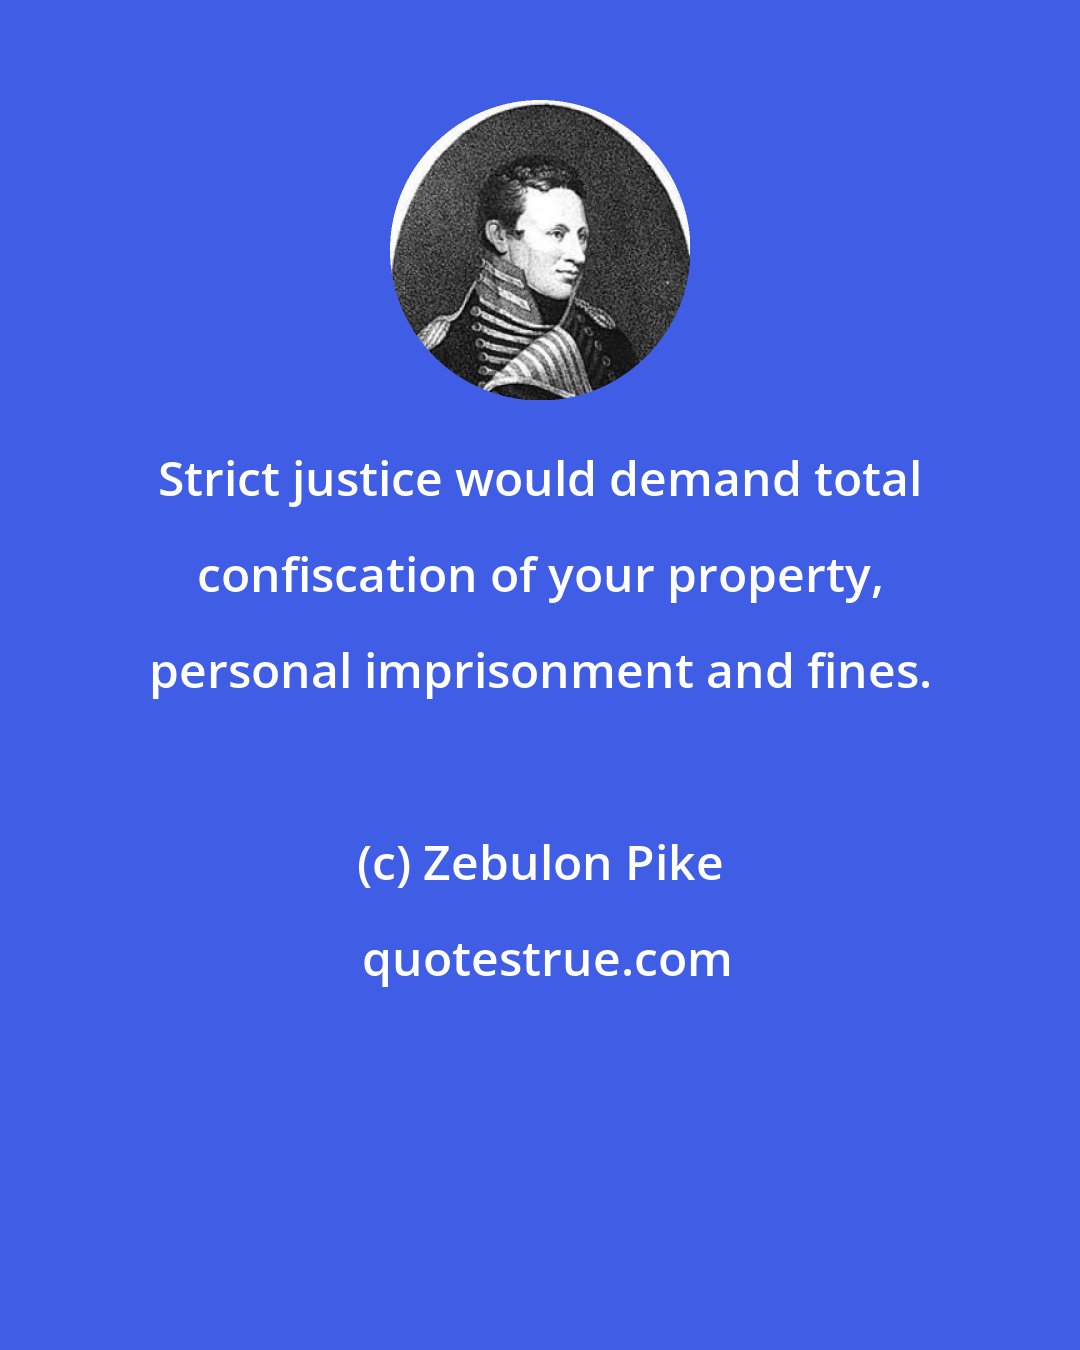 Zebulon Pike: Strict justice would demand total confiscation of your property, personal imprisonment and fines.